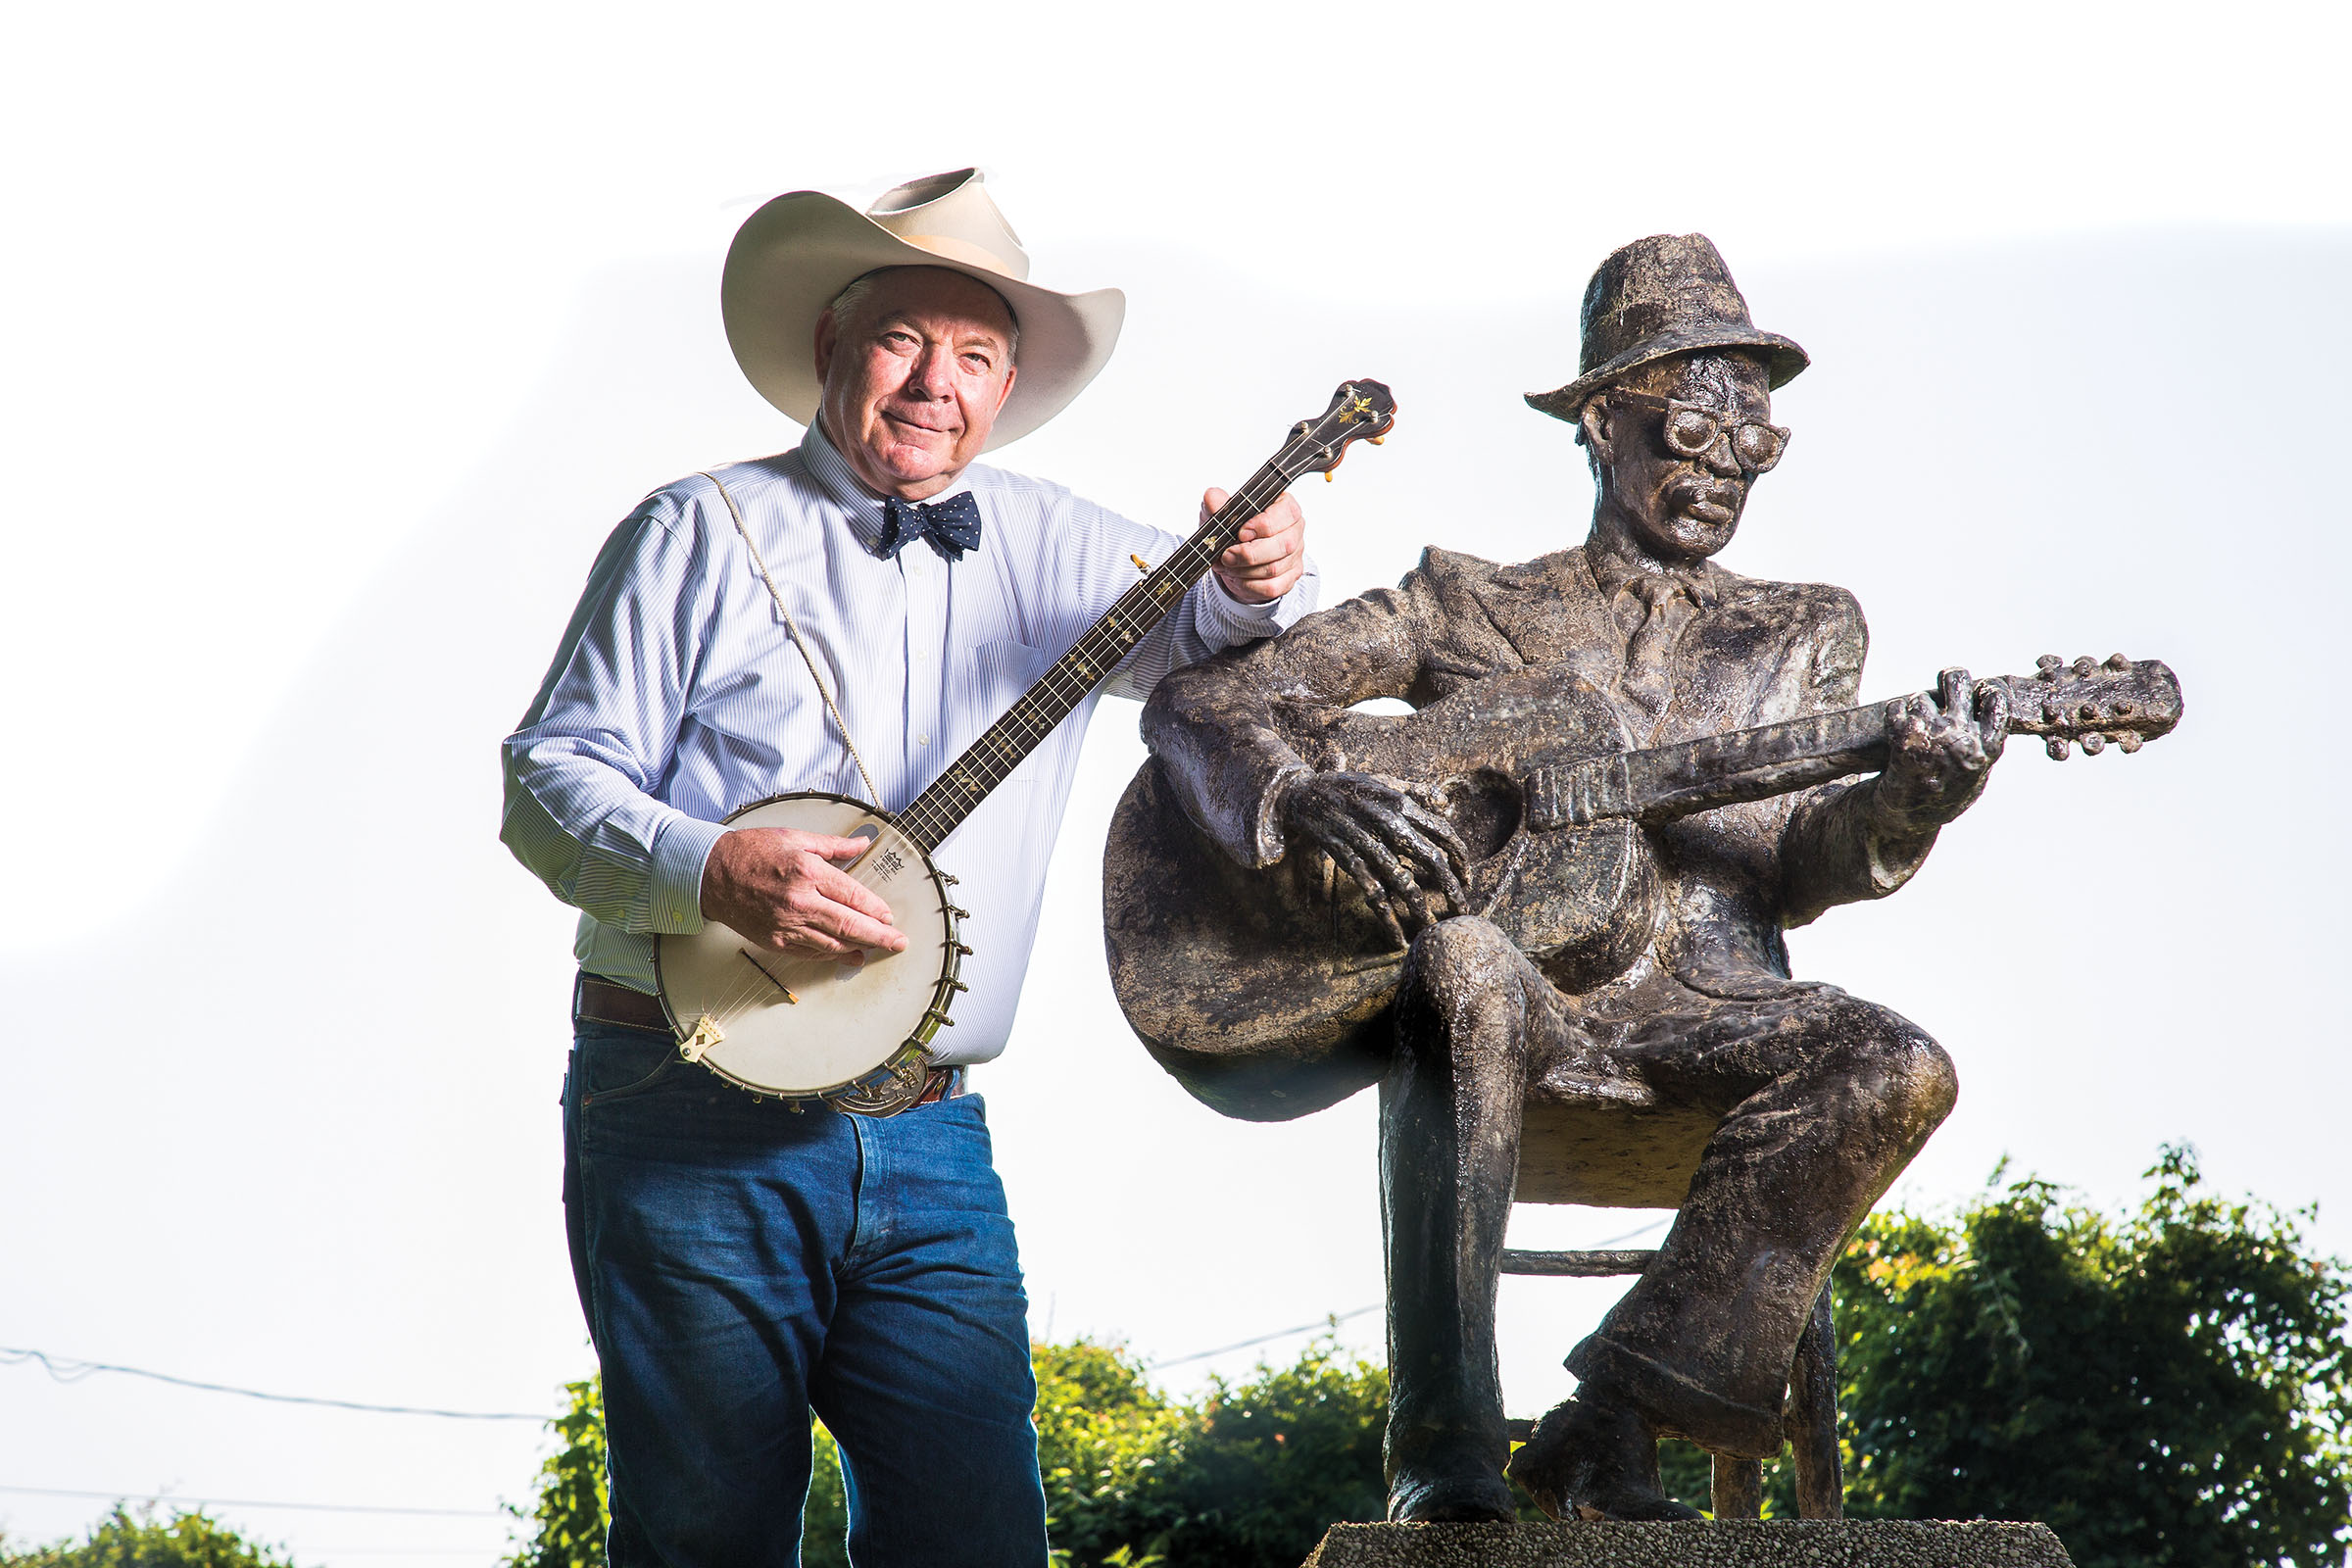 A man in a cowboy hat holding a banjo leans on a statue of a man in a small hat holding a guitar